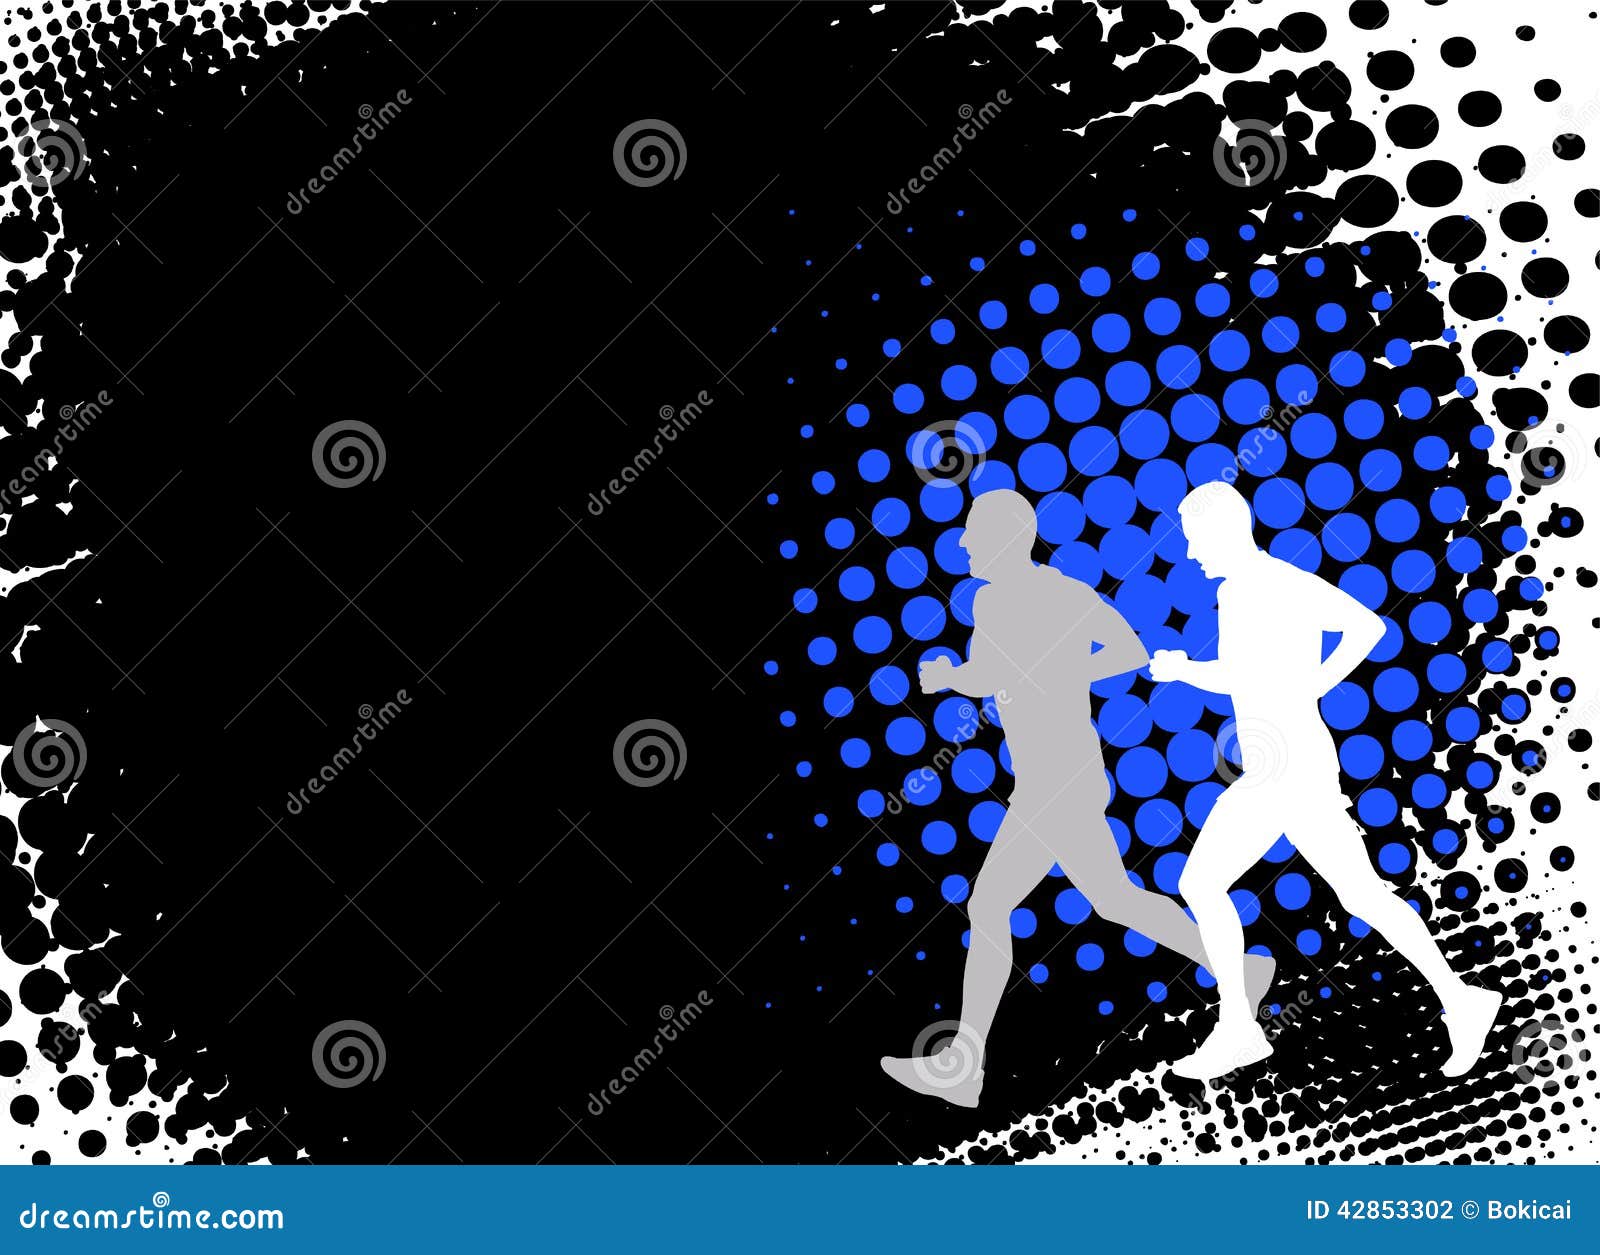 Runners On The Abstract Background Stock Vector Illustration Of